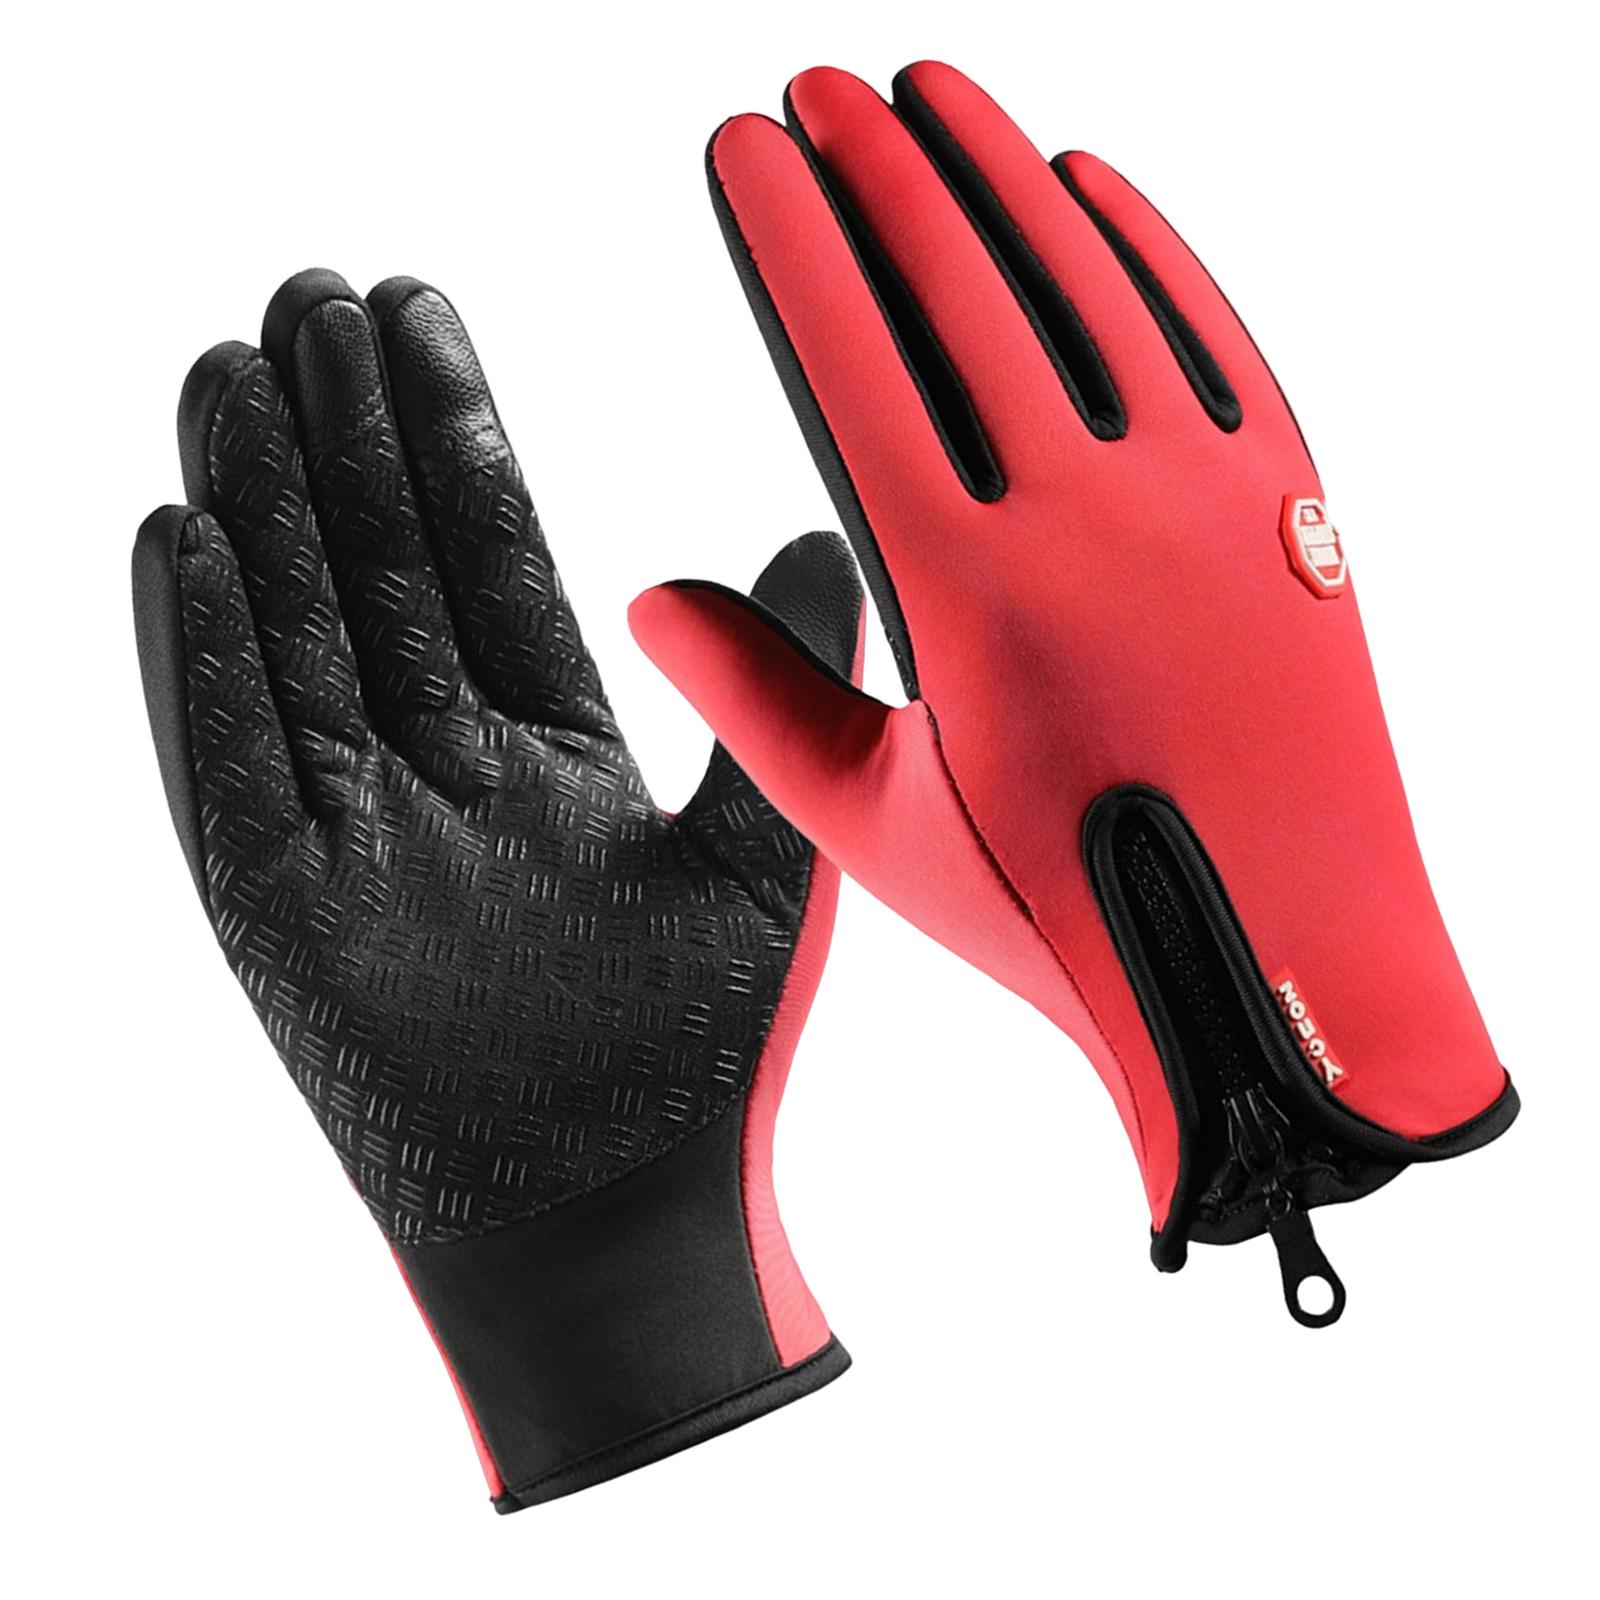 Winter Gloves Nonslip Thermal Gloves for Outdoor Running Sports Motorcycle L Red